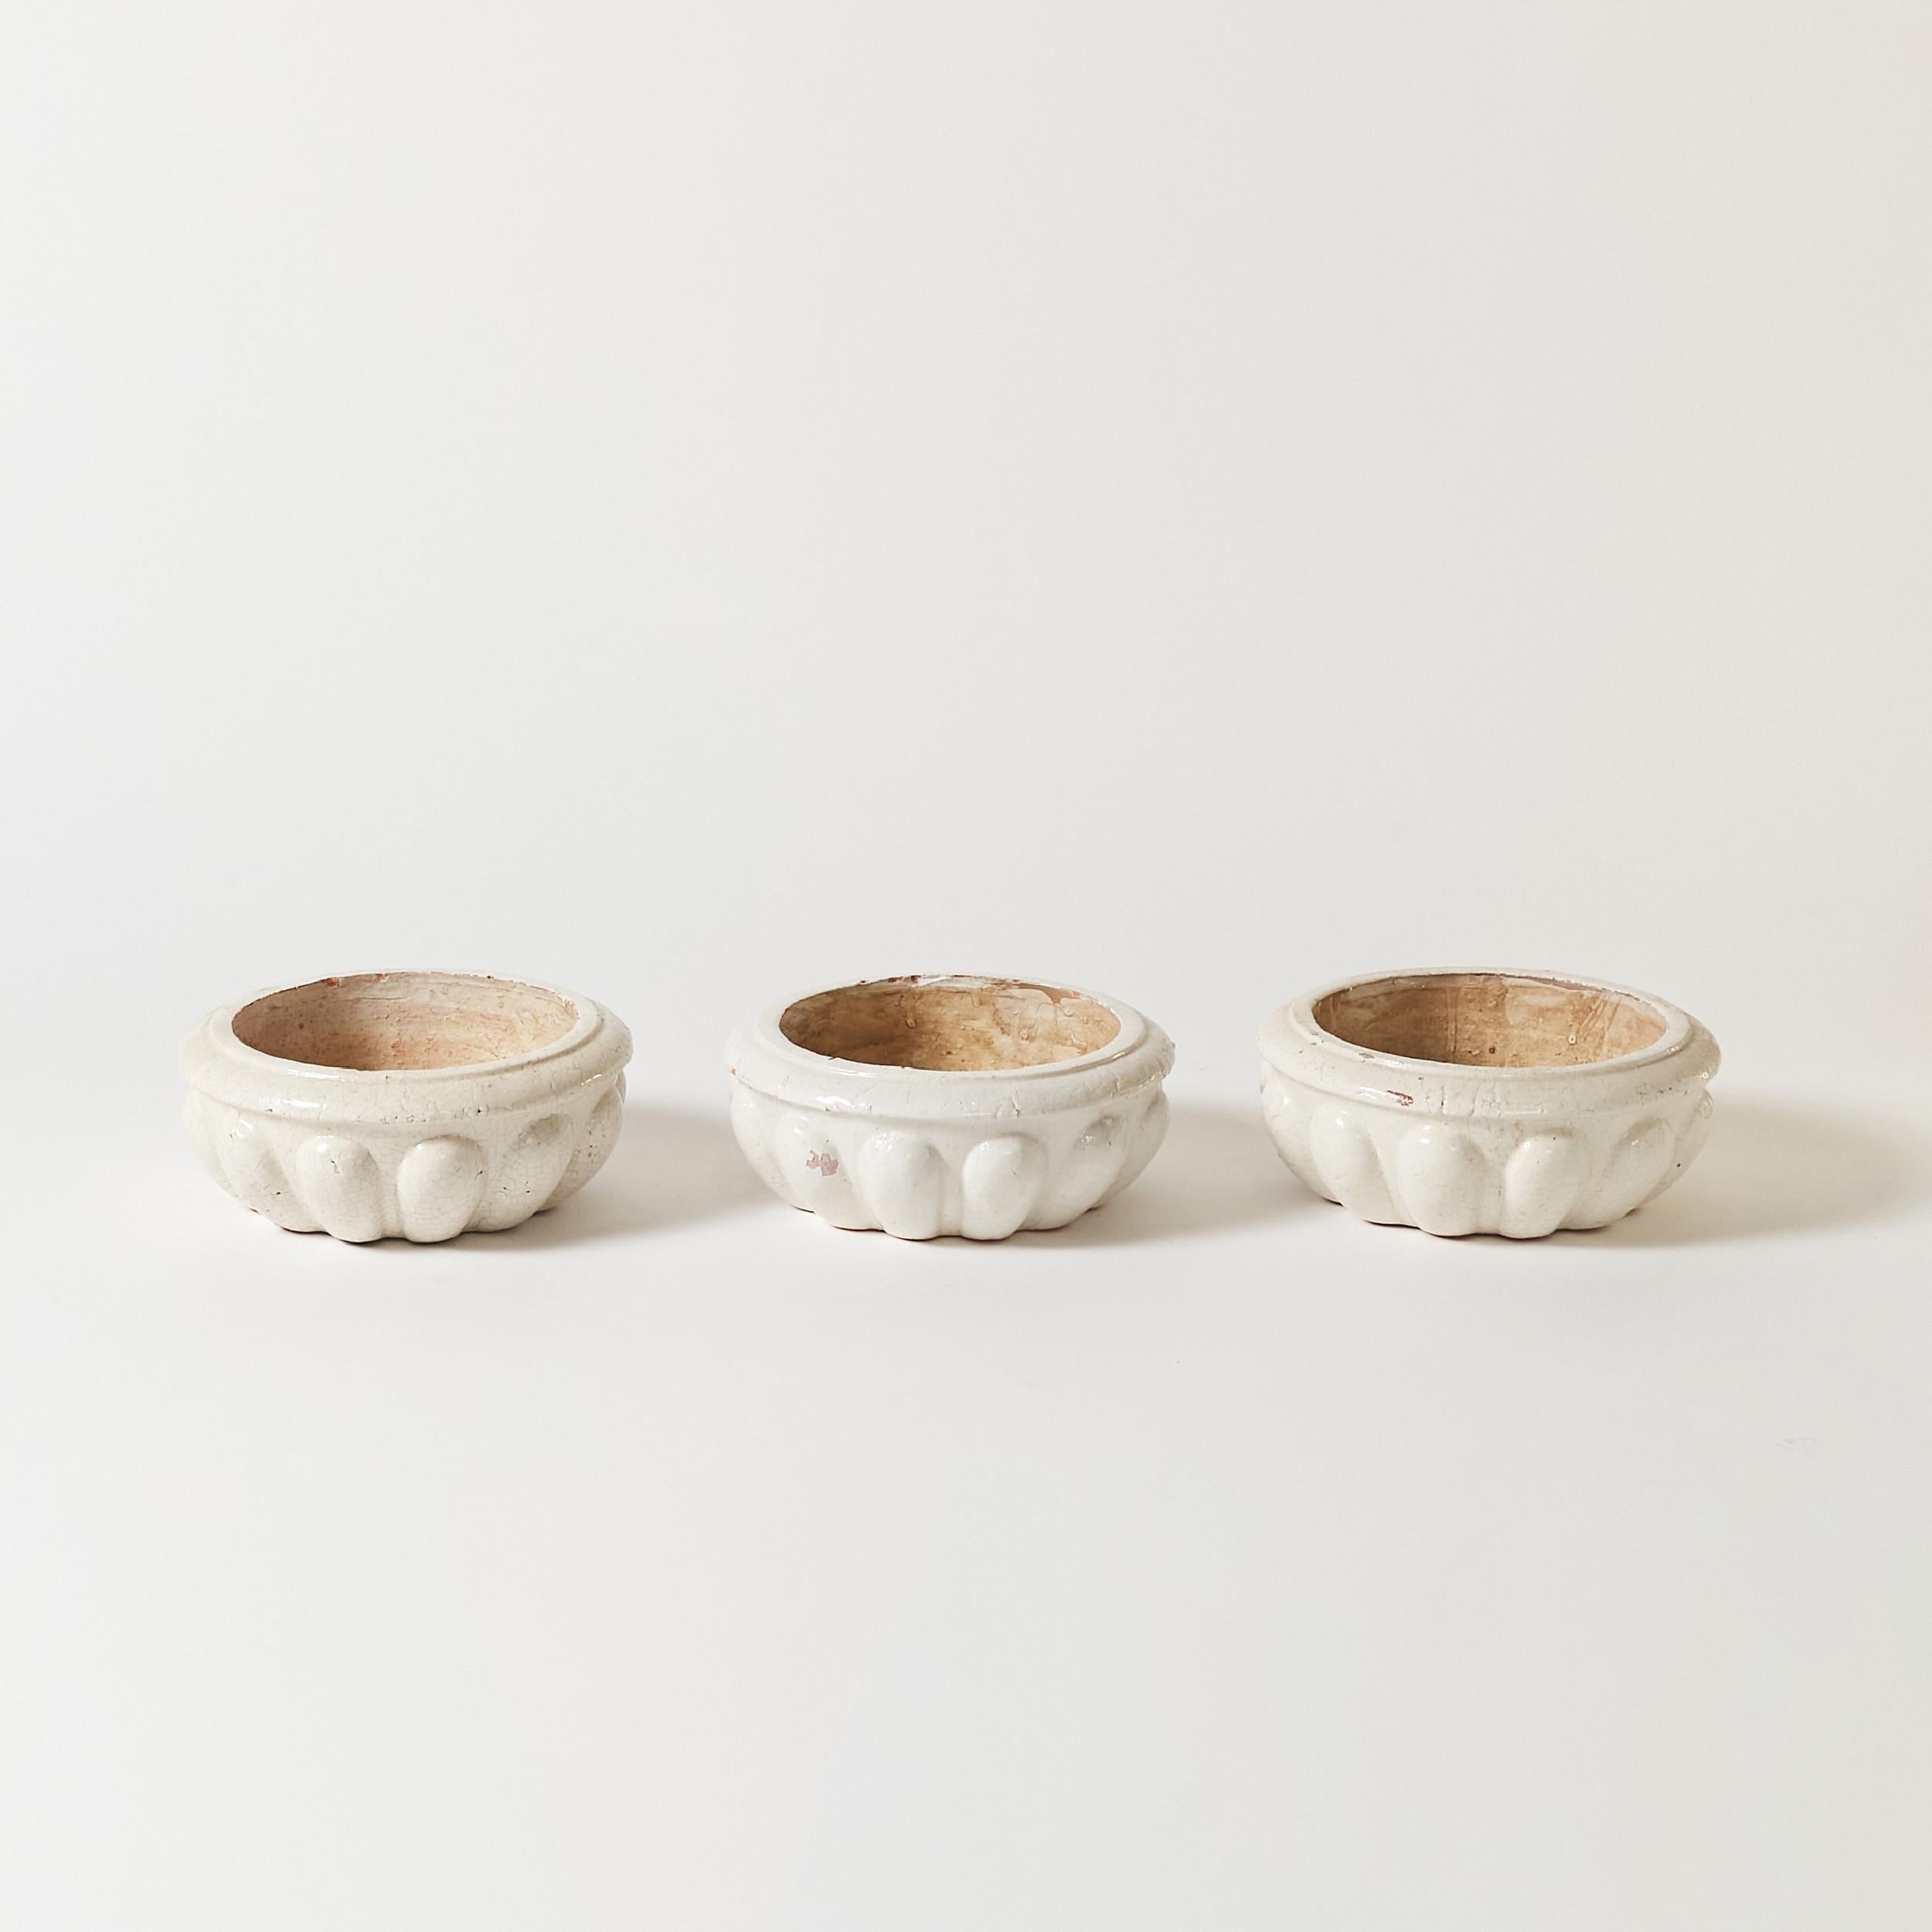 Set of three Dutch terracota low round planters finished in white crackled glaze finish.
PTMD stamped on bottom.